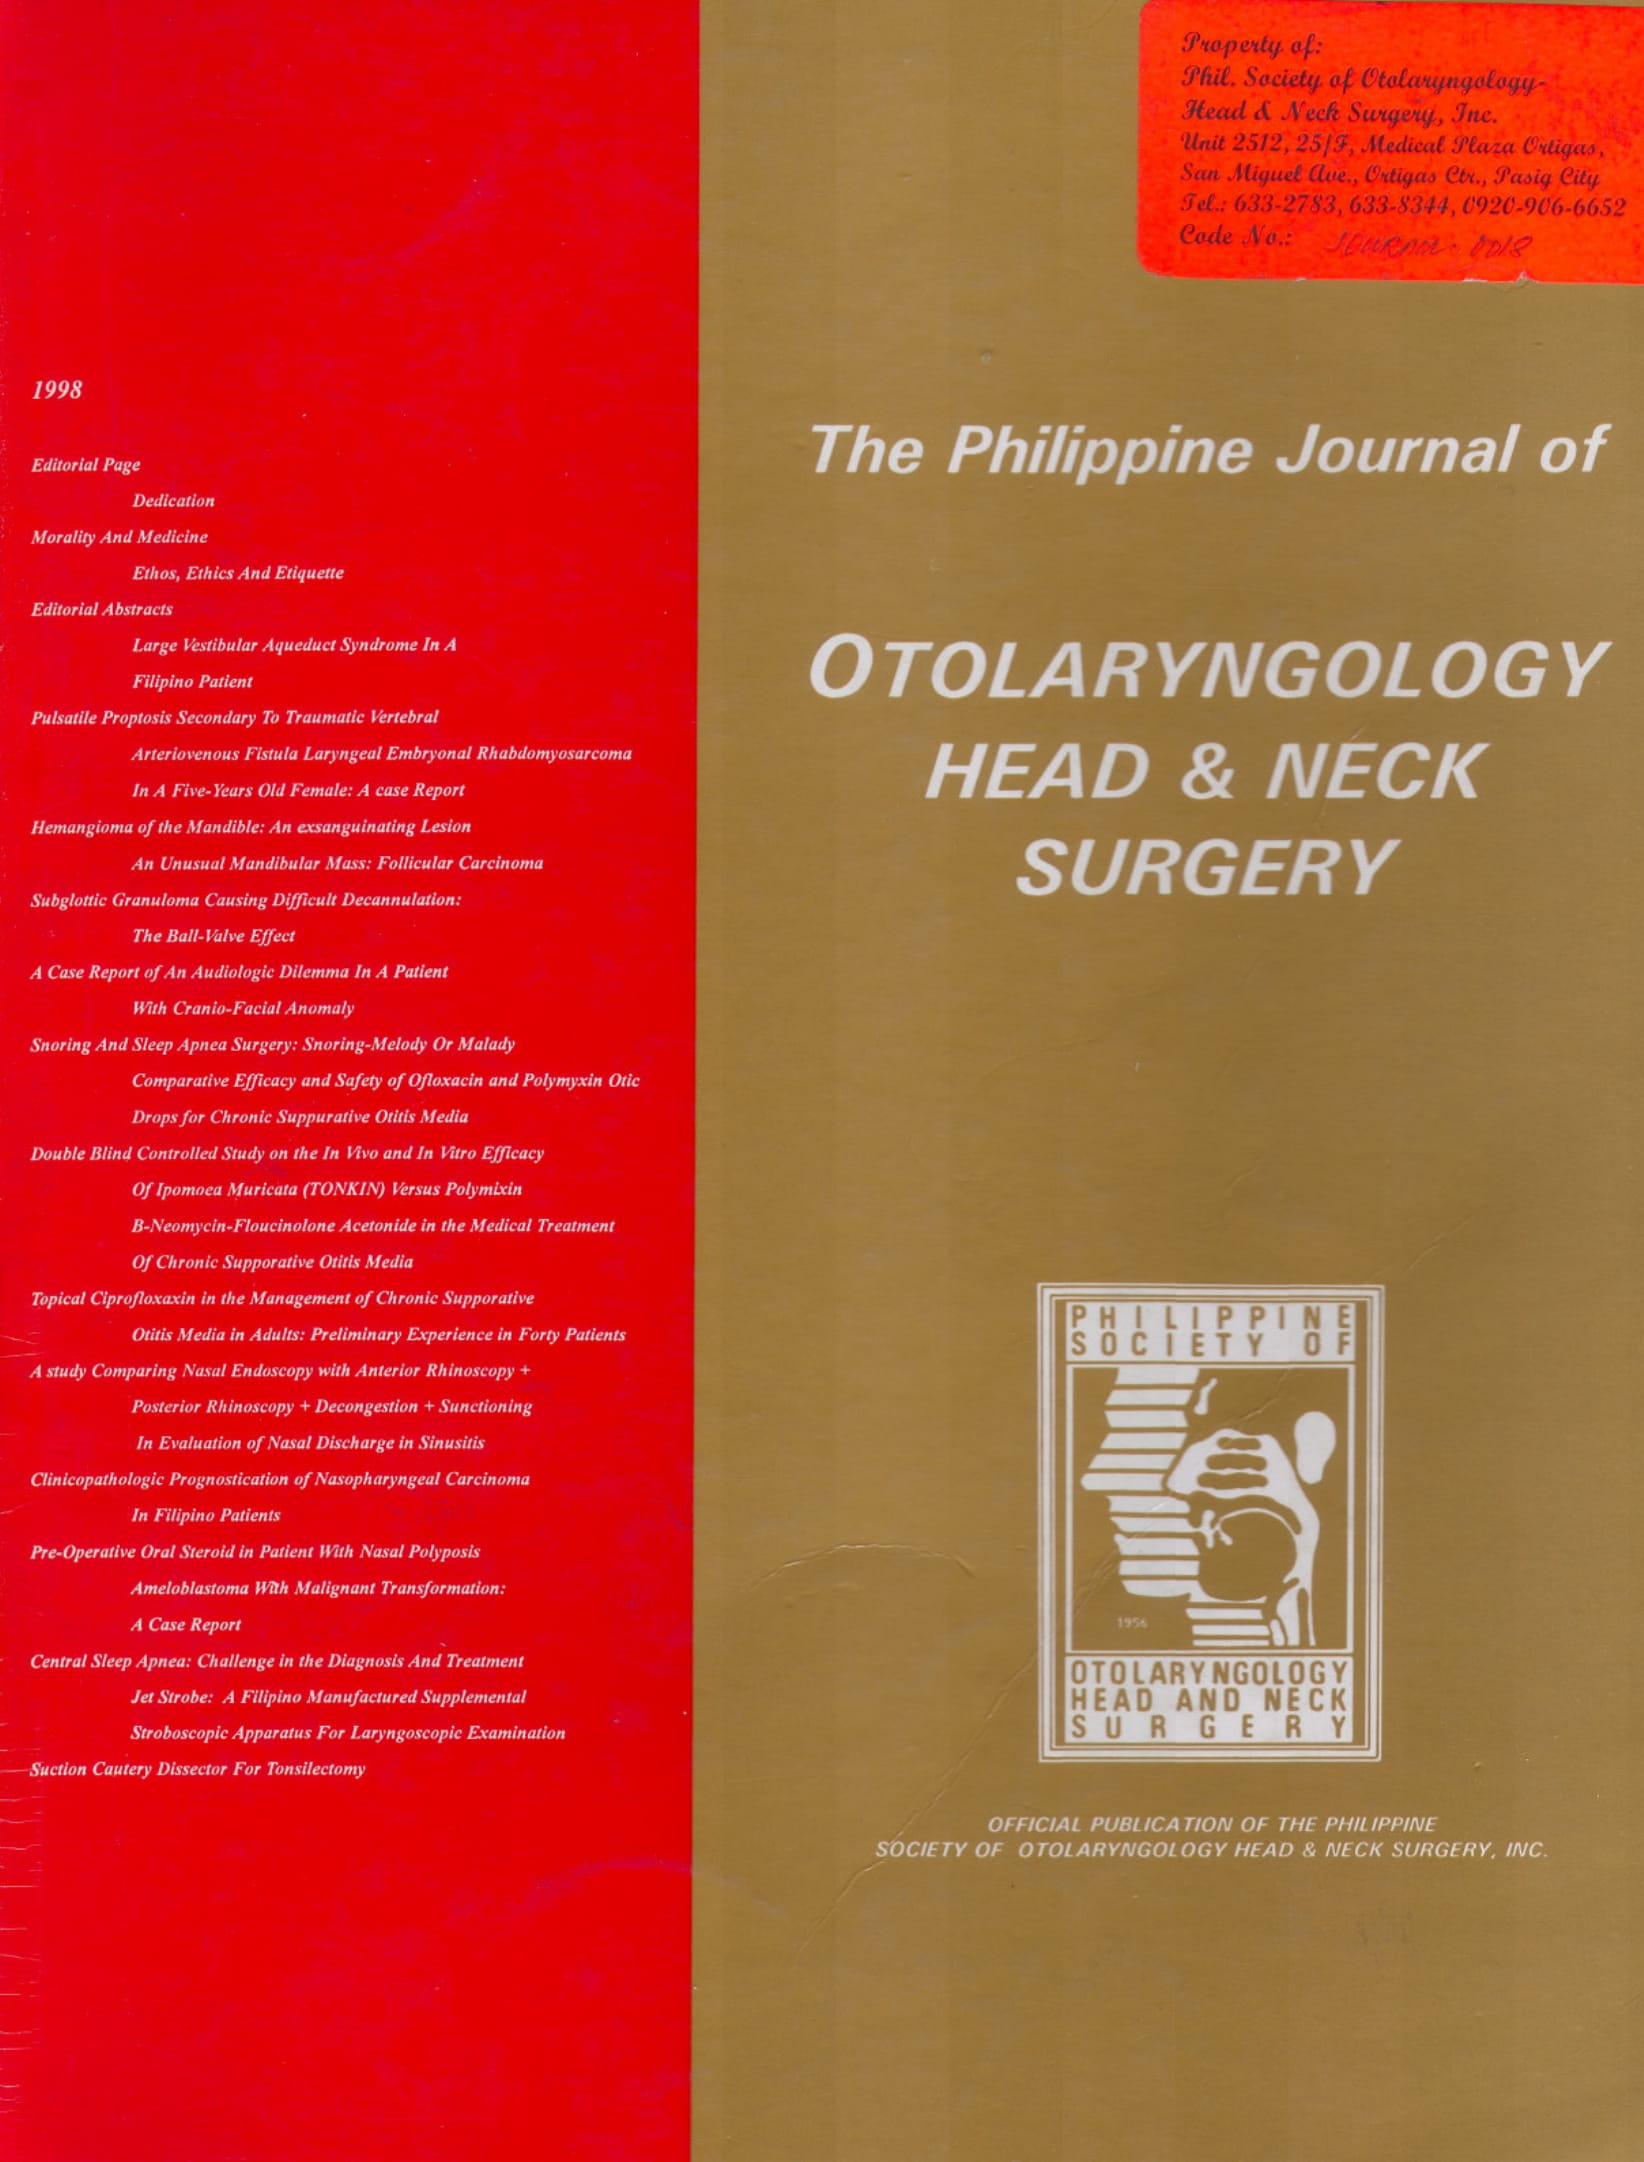 					View 1998: Philippine Journal of Otolaryngology-Head and Neck Surgery
				